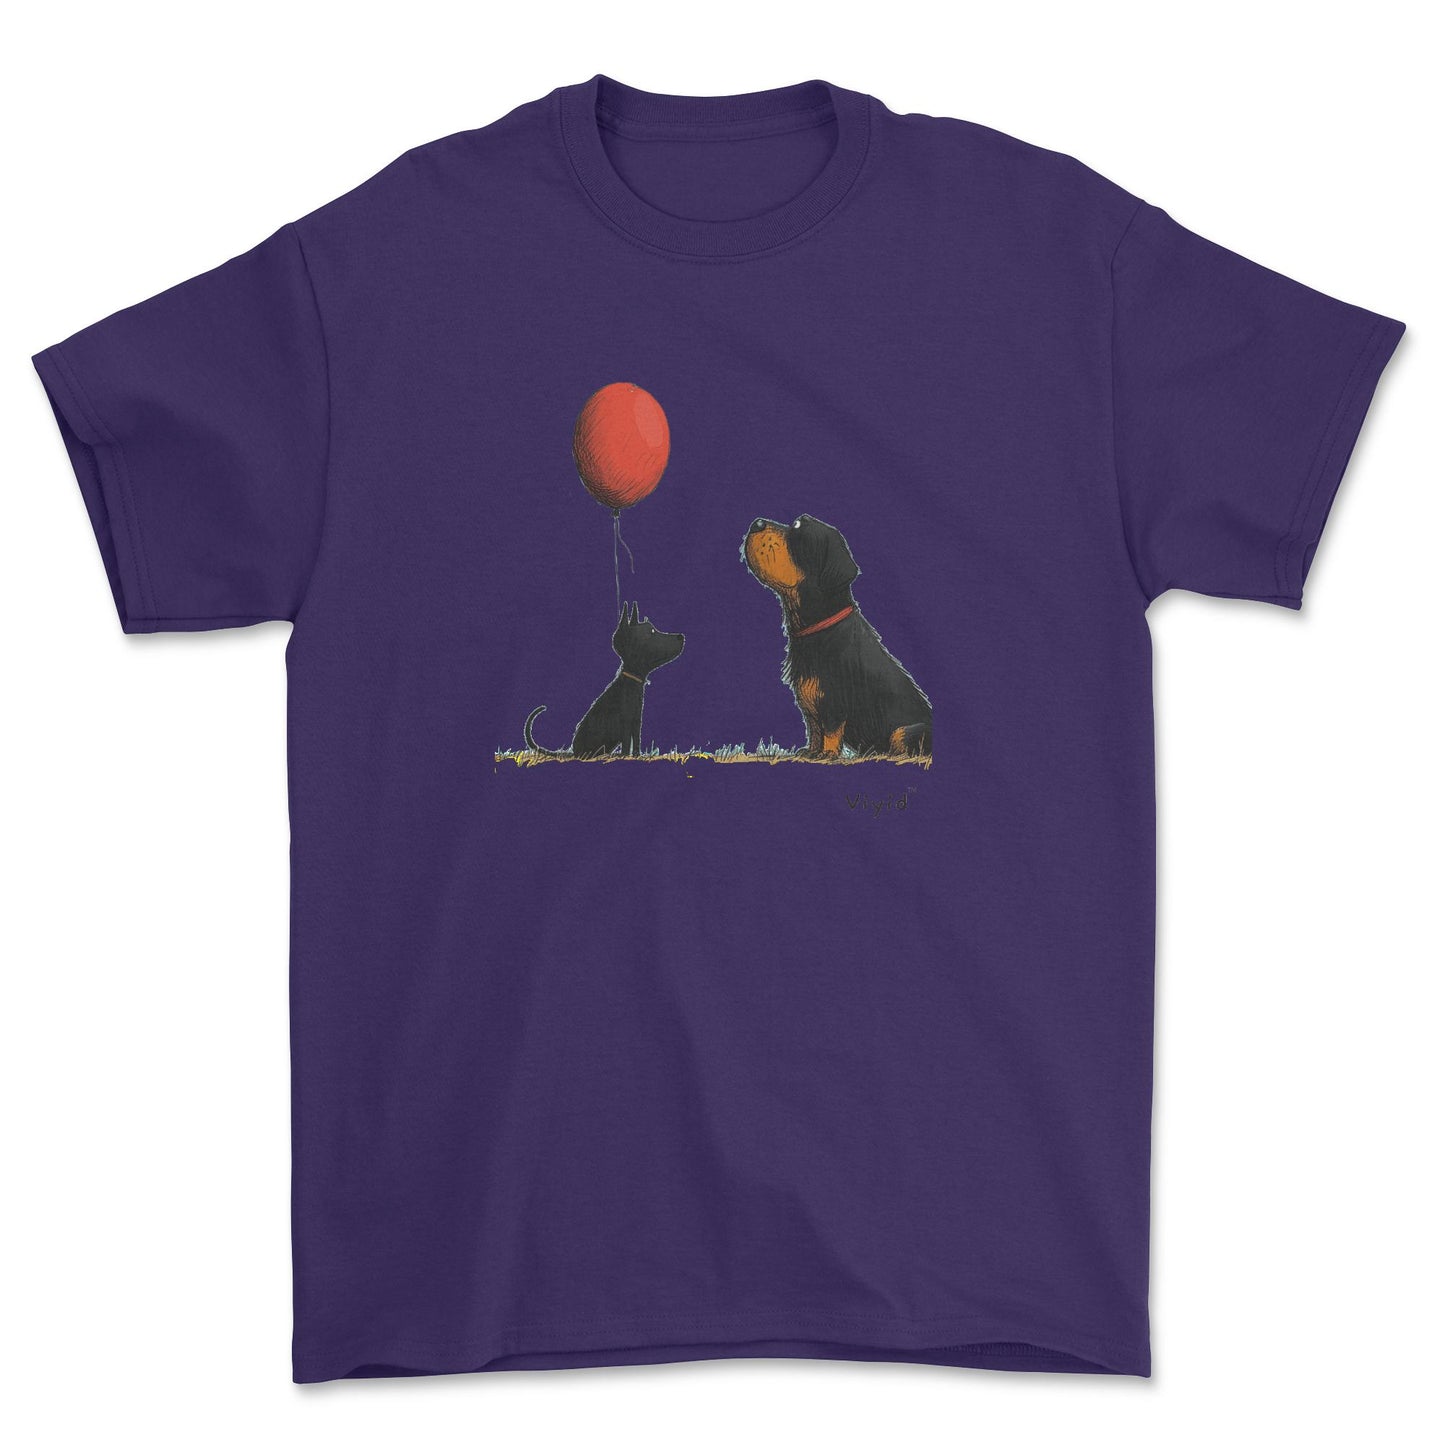 Rottweiler with balloon adult t-shirt purple